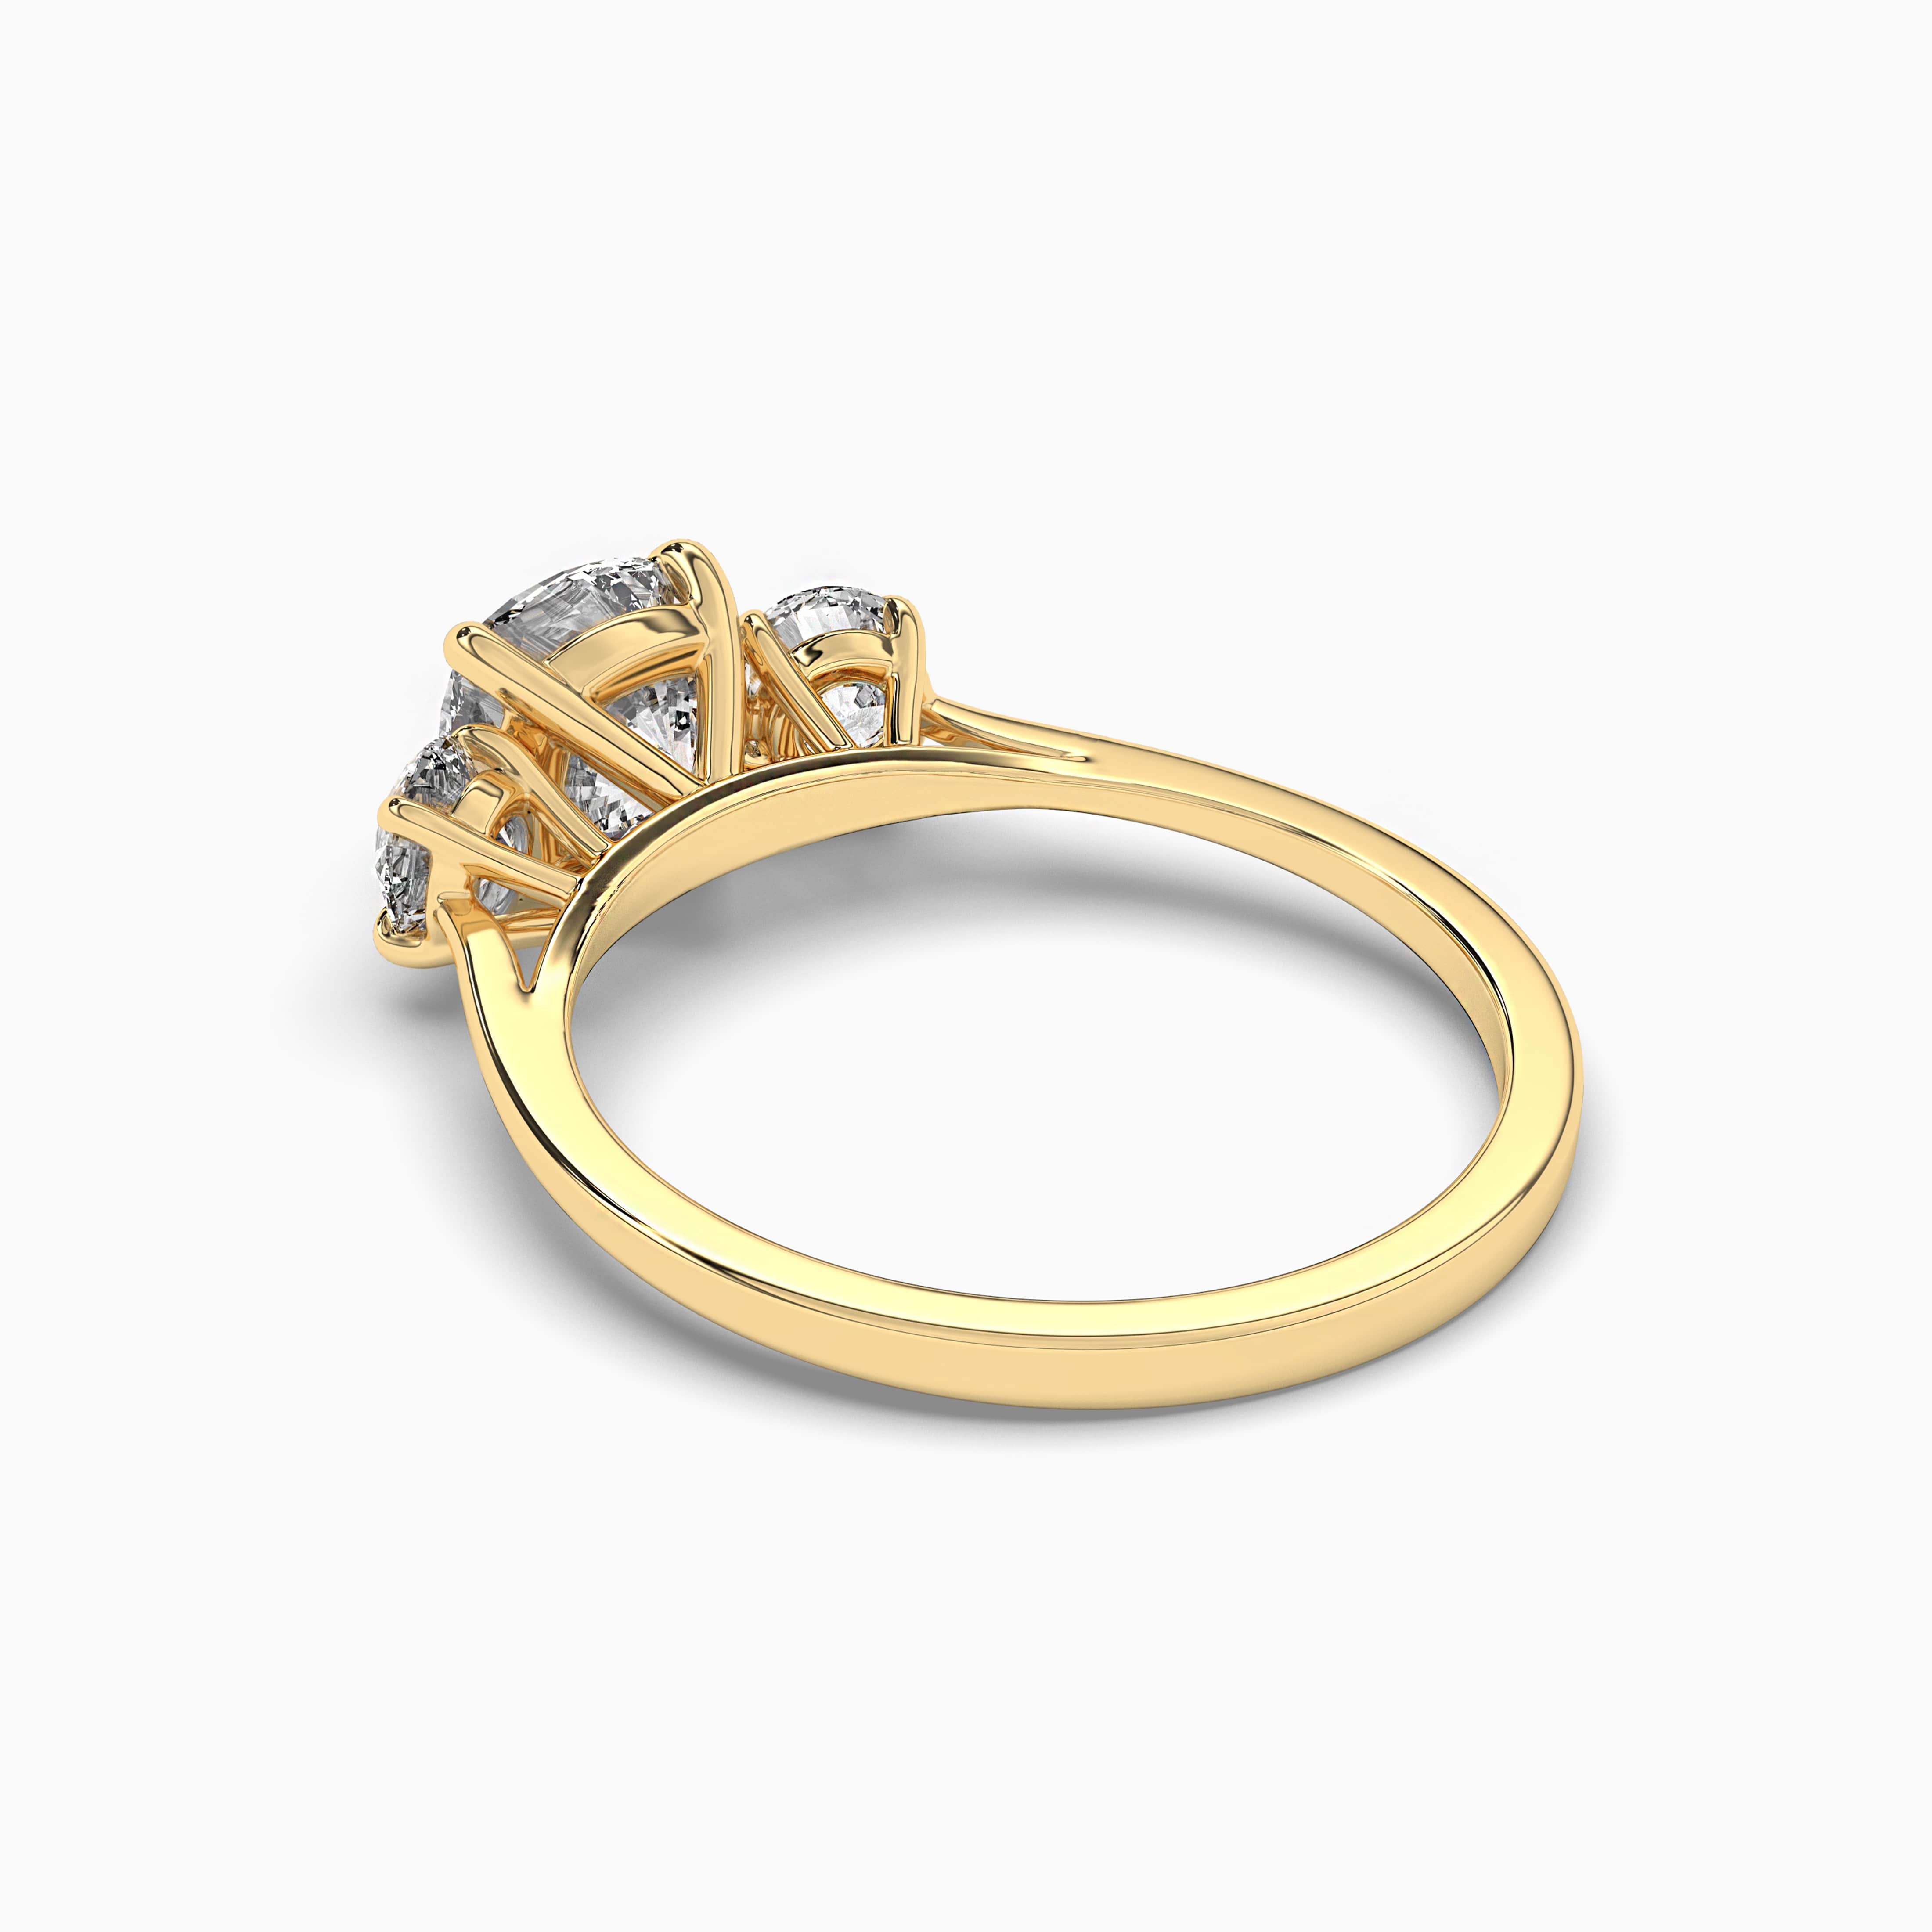 YELLOW GOLD SIDE STONE ENGAGEMENT RING